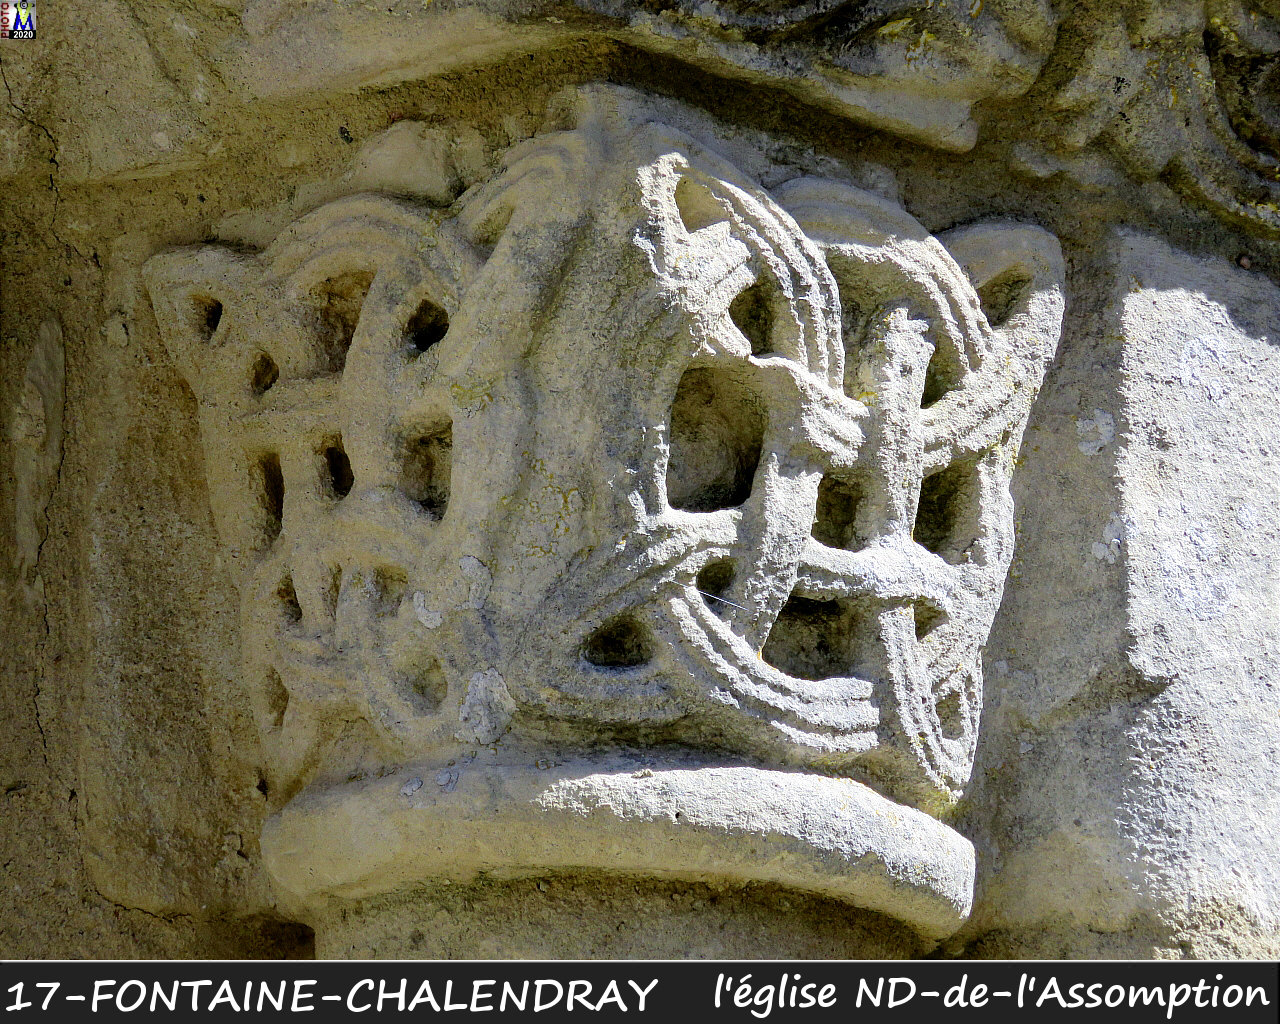 17FONTAINE-CHALENDRAY_eglise_1036.jpg